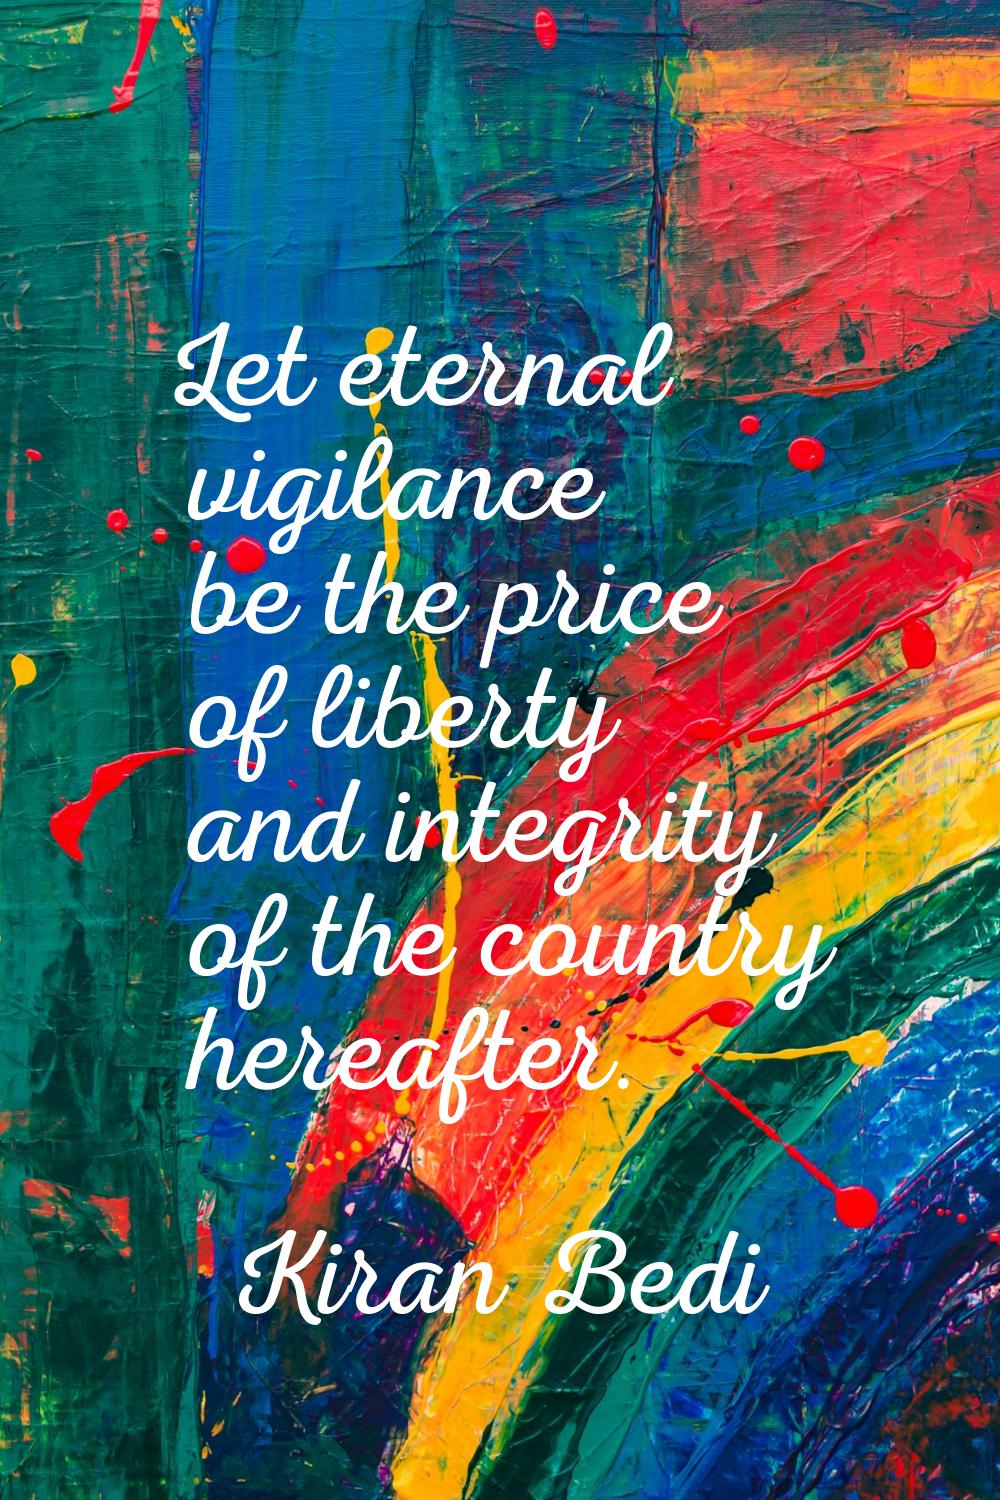 Let eternal vigilance be the price of liberty and integrity of the country hereafter.